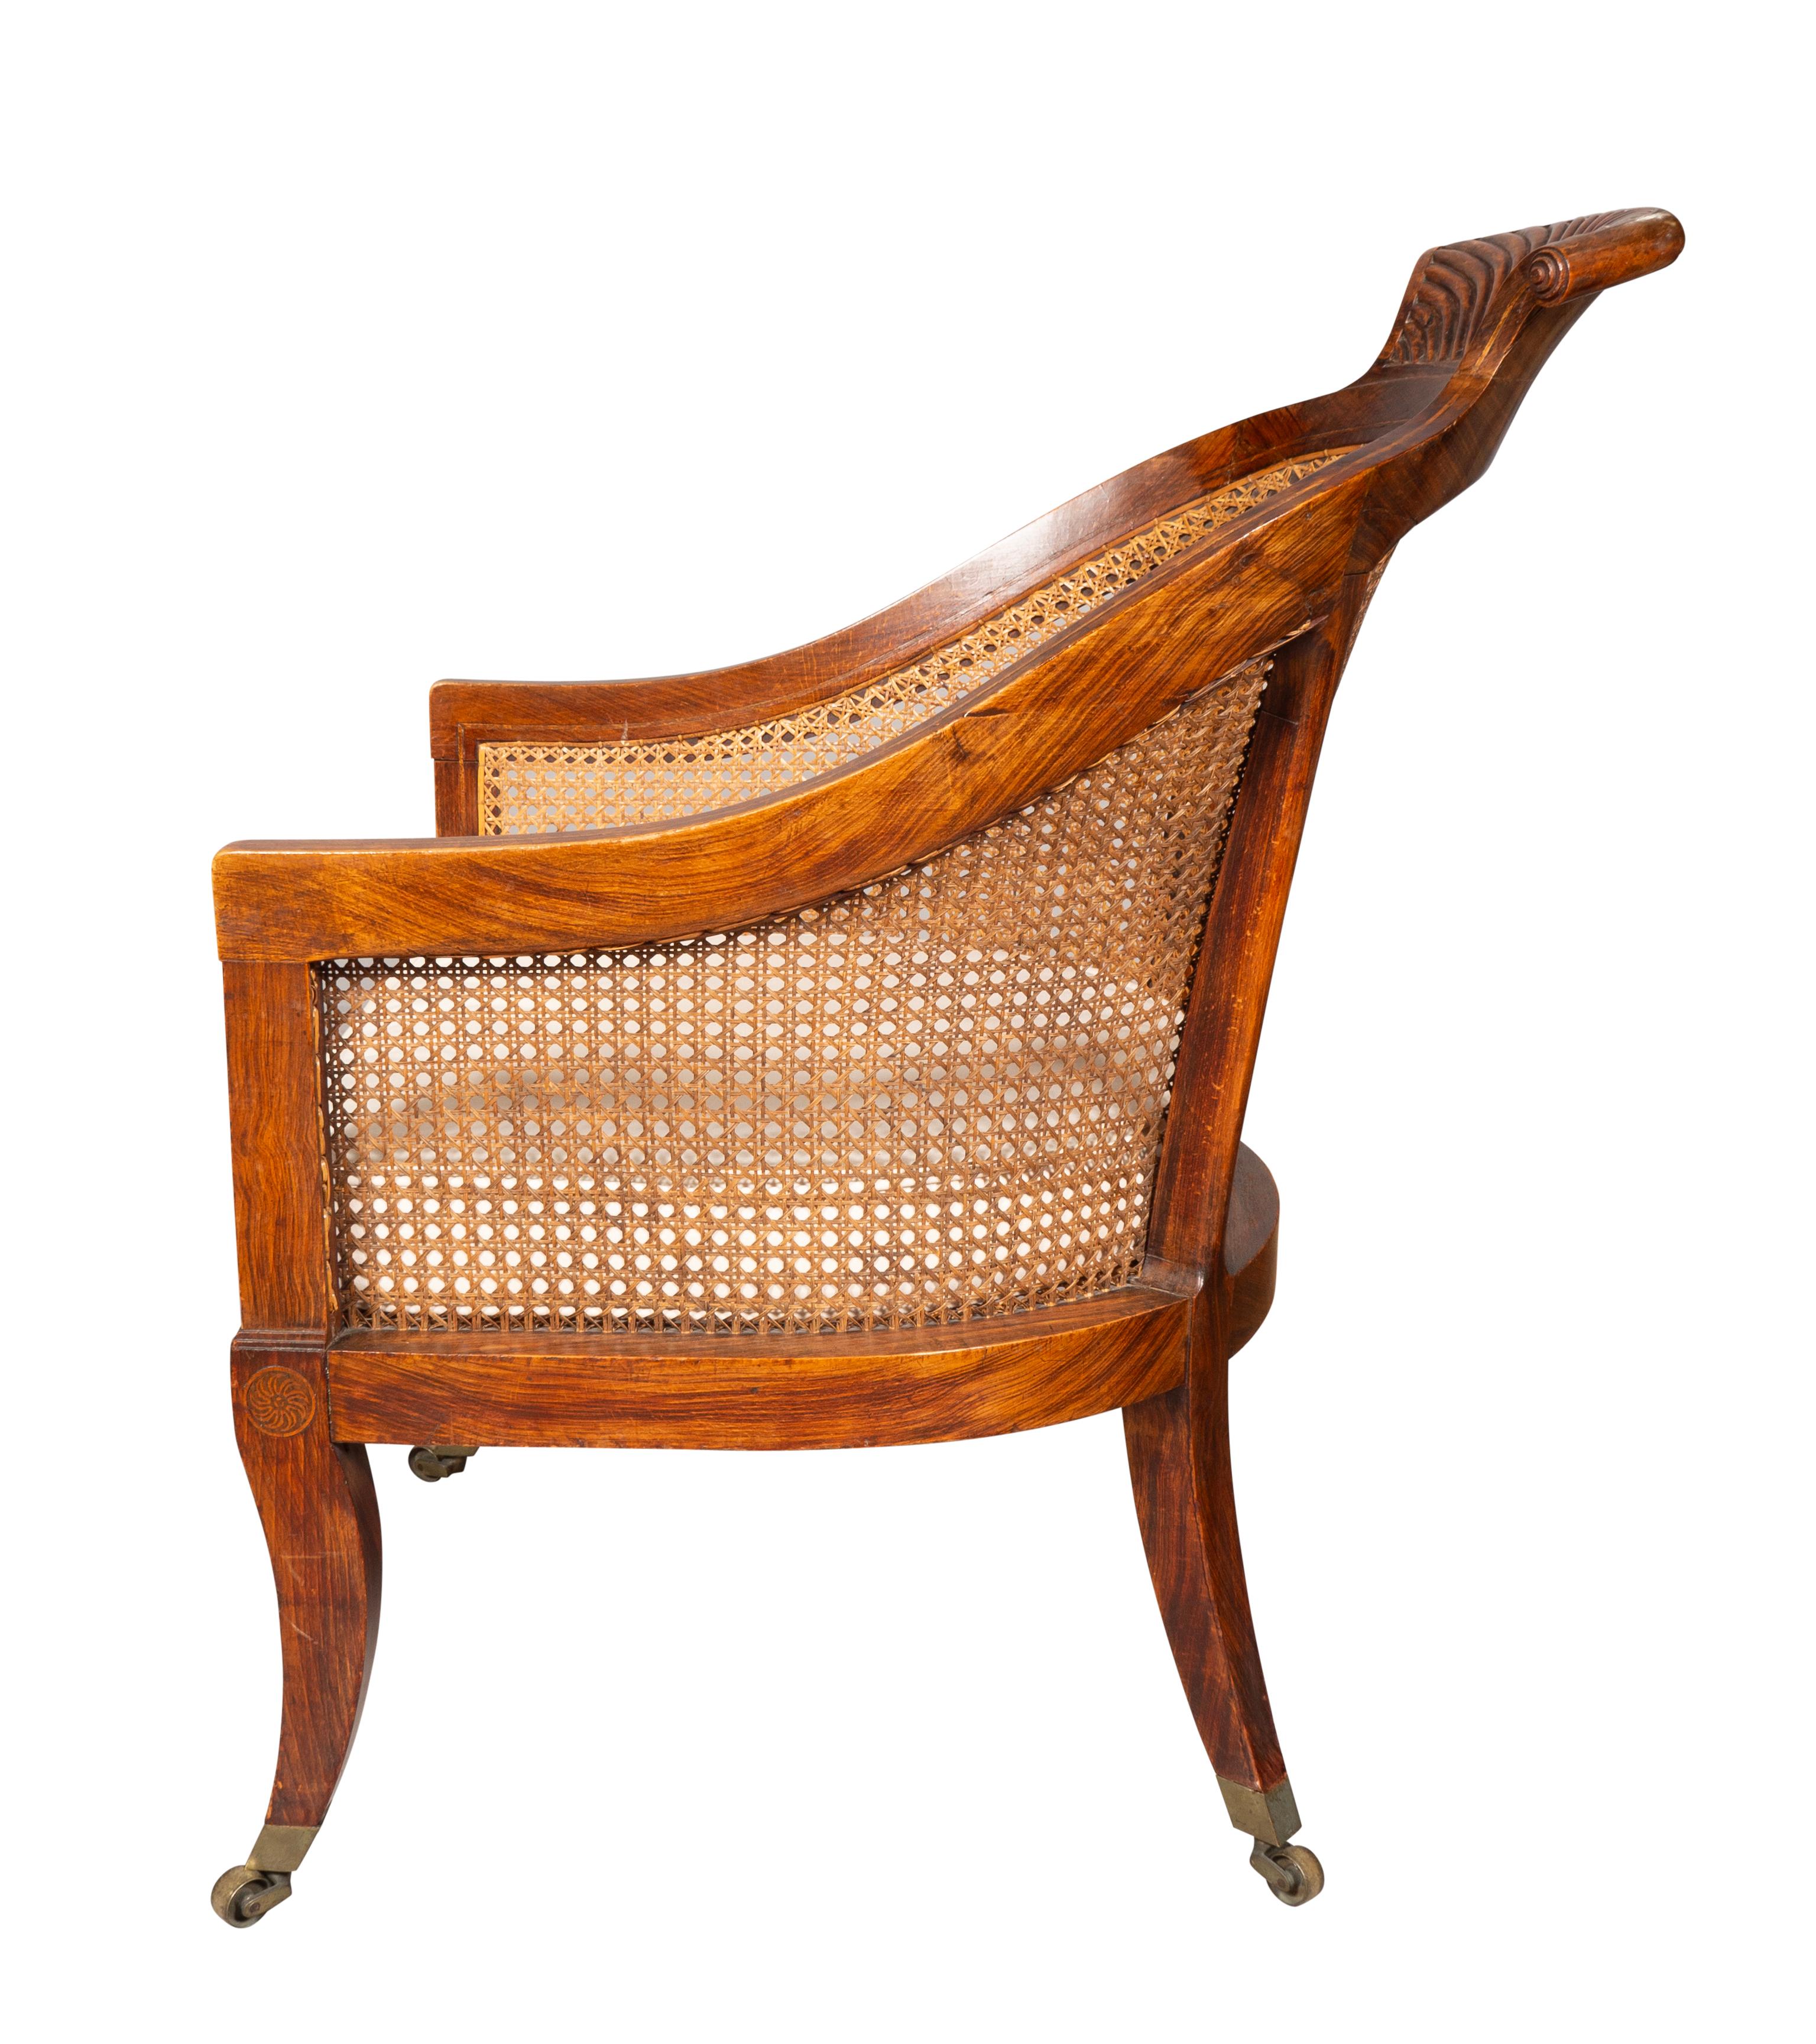 Regency Faux Rosewood Caned Tub Chair im Zustand „Gut“ im Angebot in Essex, MA